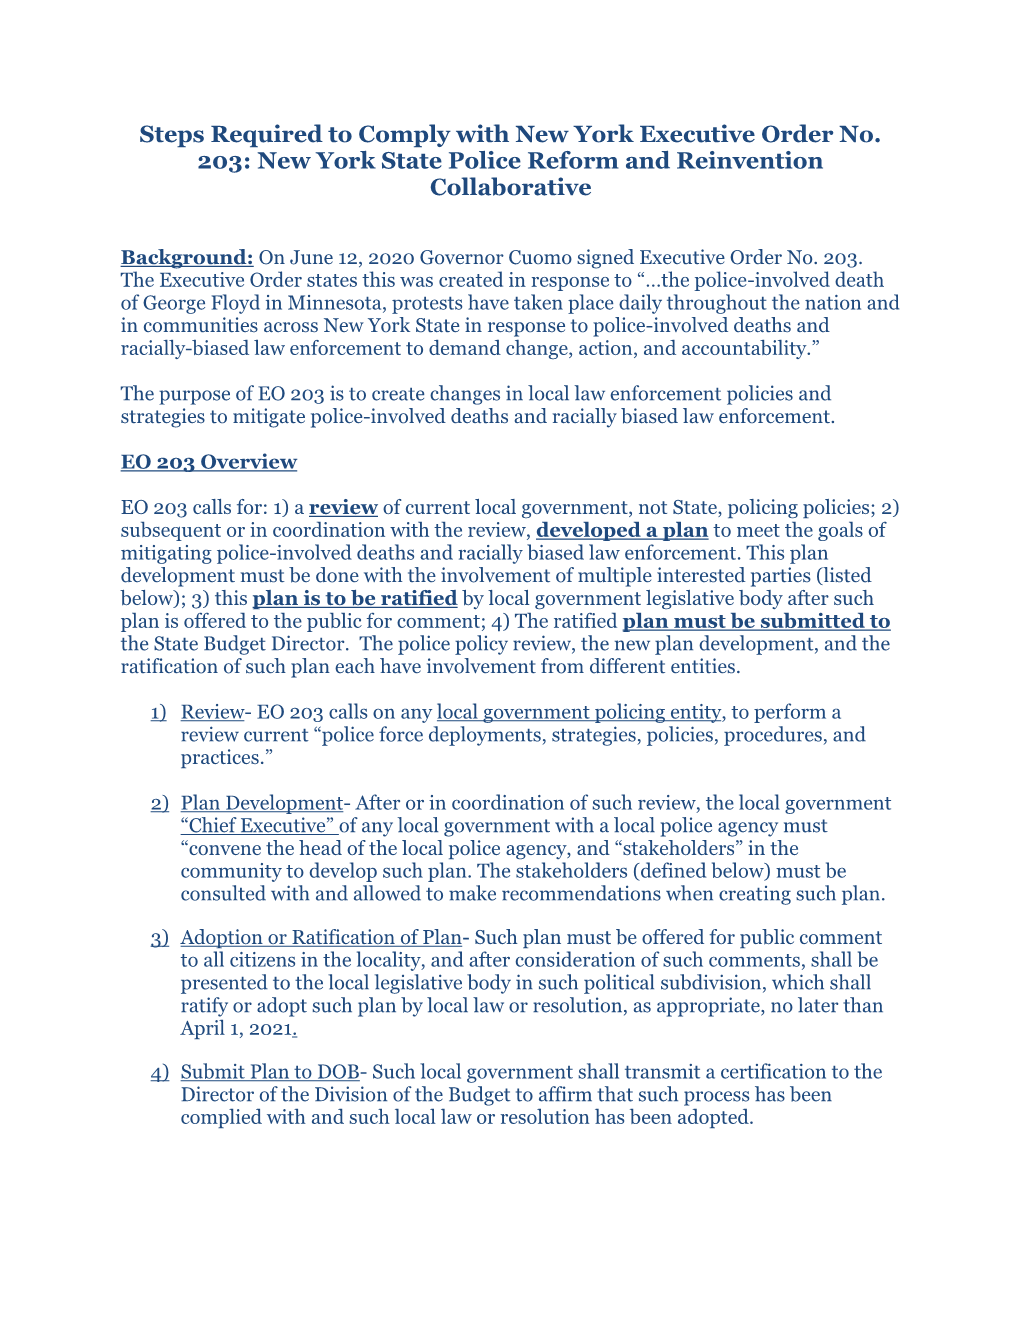 NYSAC Analysis of Executive Order 203, Police Reforms